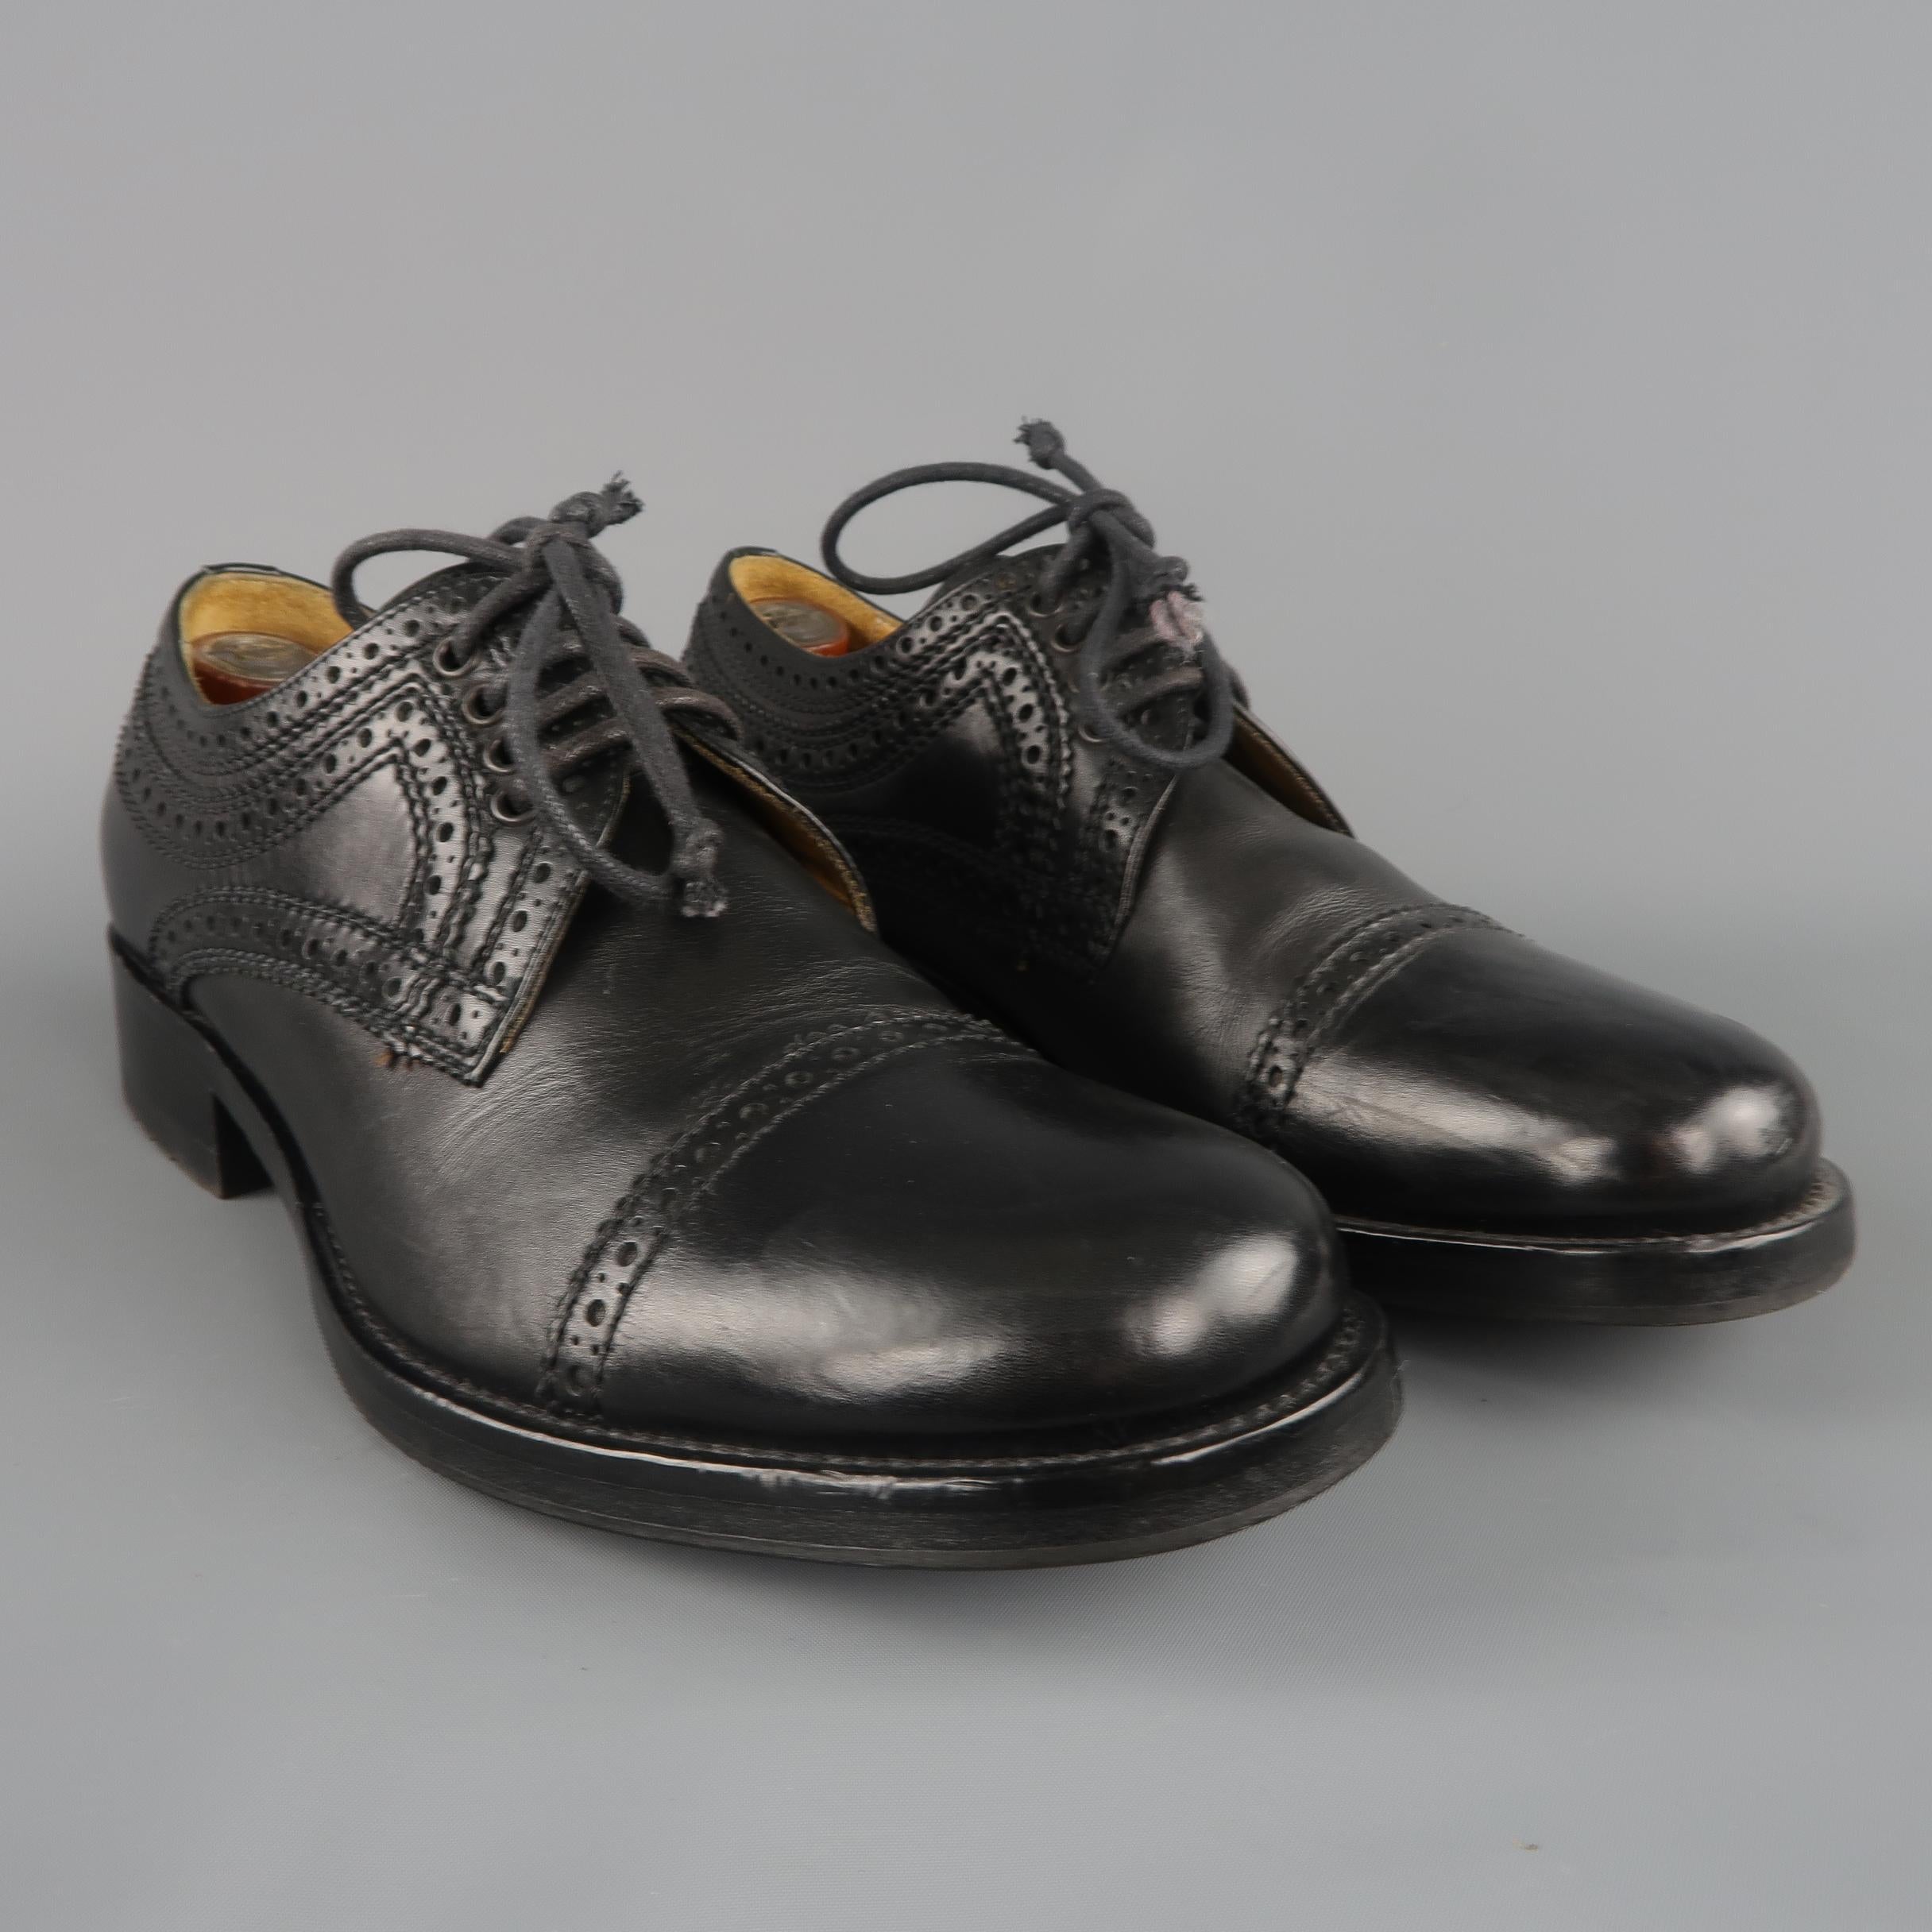 Stylish dress shoe by ALEXANDER MCQUEEN in black leather with perforated detailing.  Cap toe, wooden stack heel, 5 eyelet laces.  Made in Italy.
Excellent Pre Owned Condition.
Marked As: 2 7370 Size IT 41
Fits Like: US 8